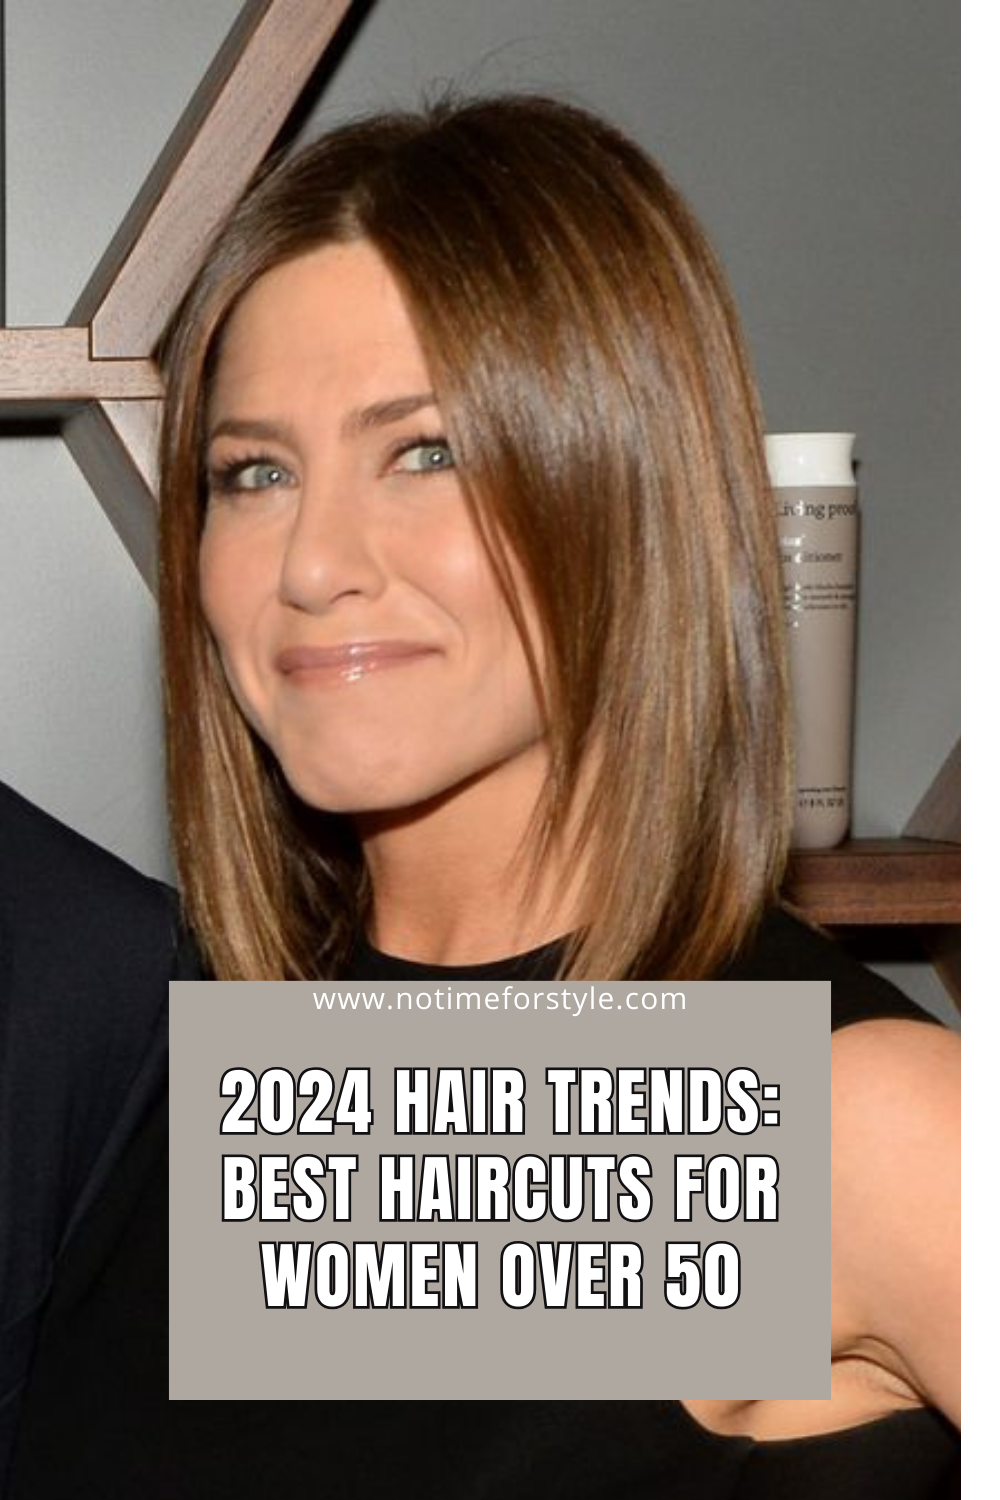 60+ Chic Hairstyles for Women Over 40 to Consider in 2023